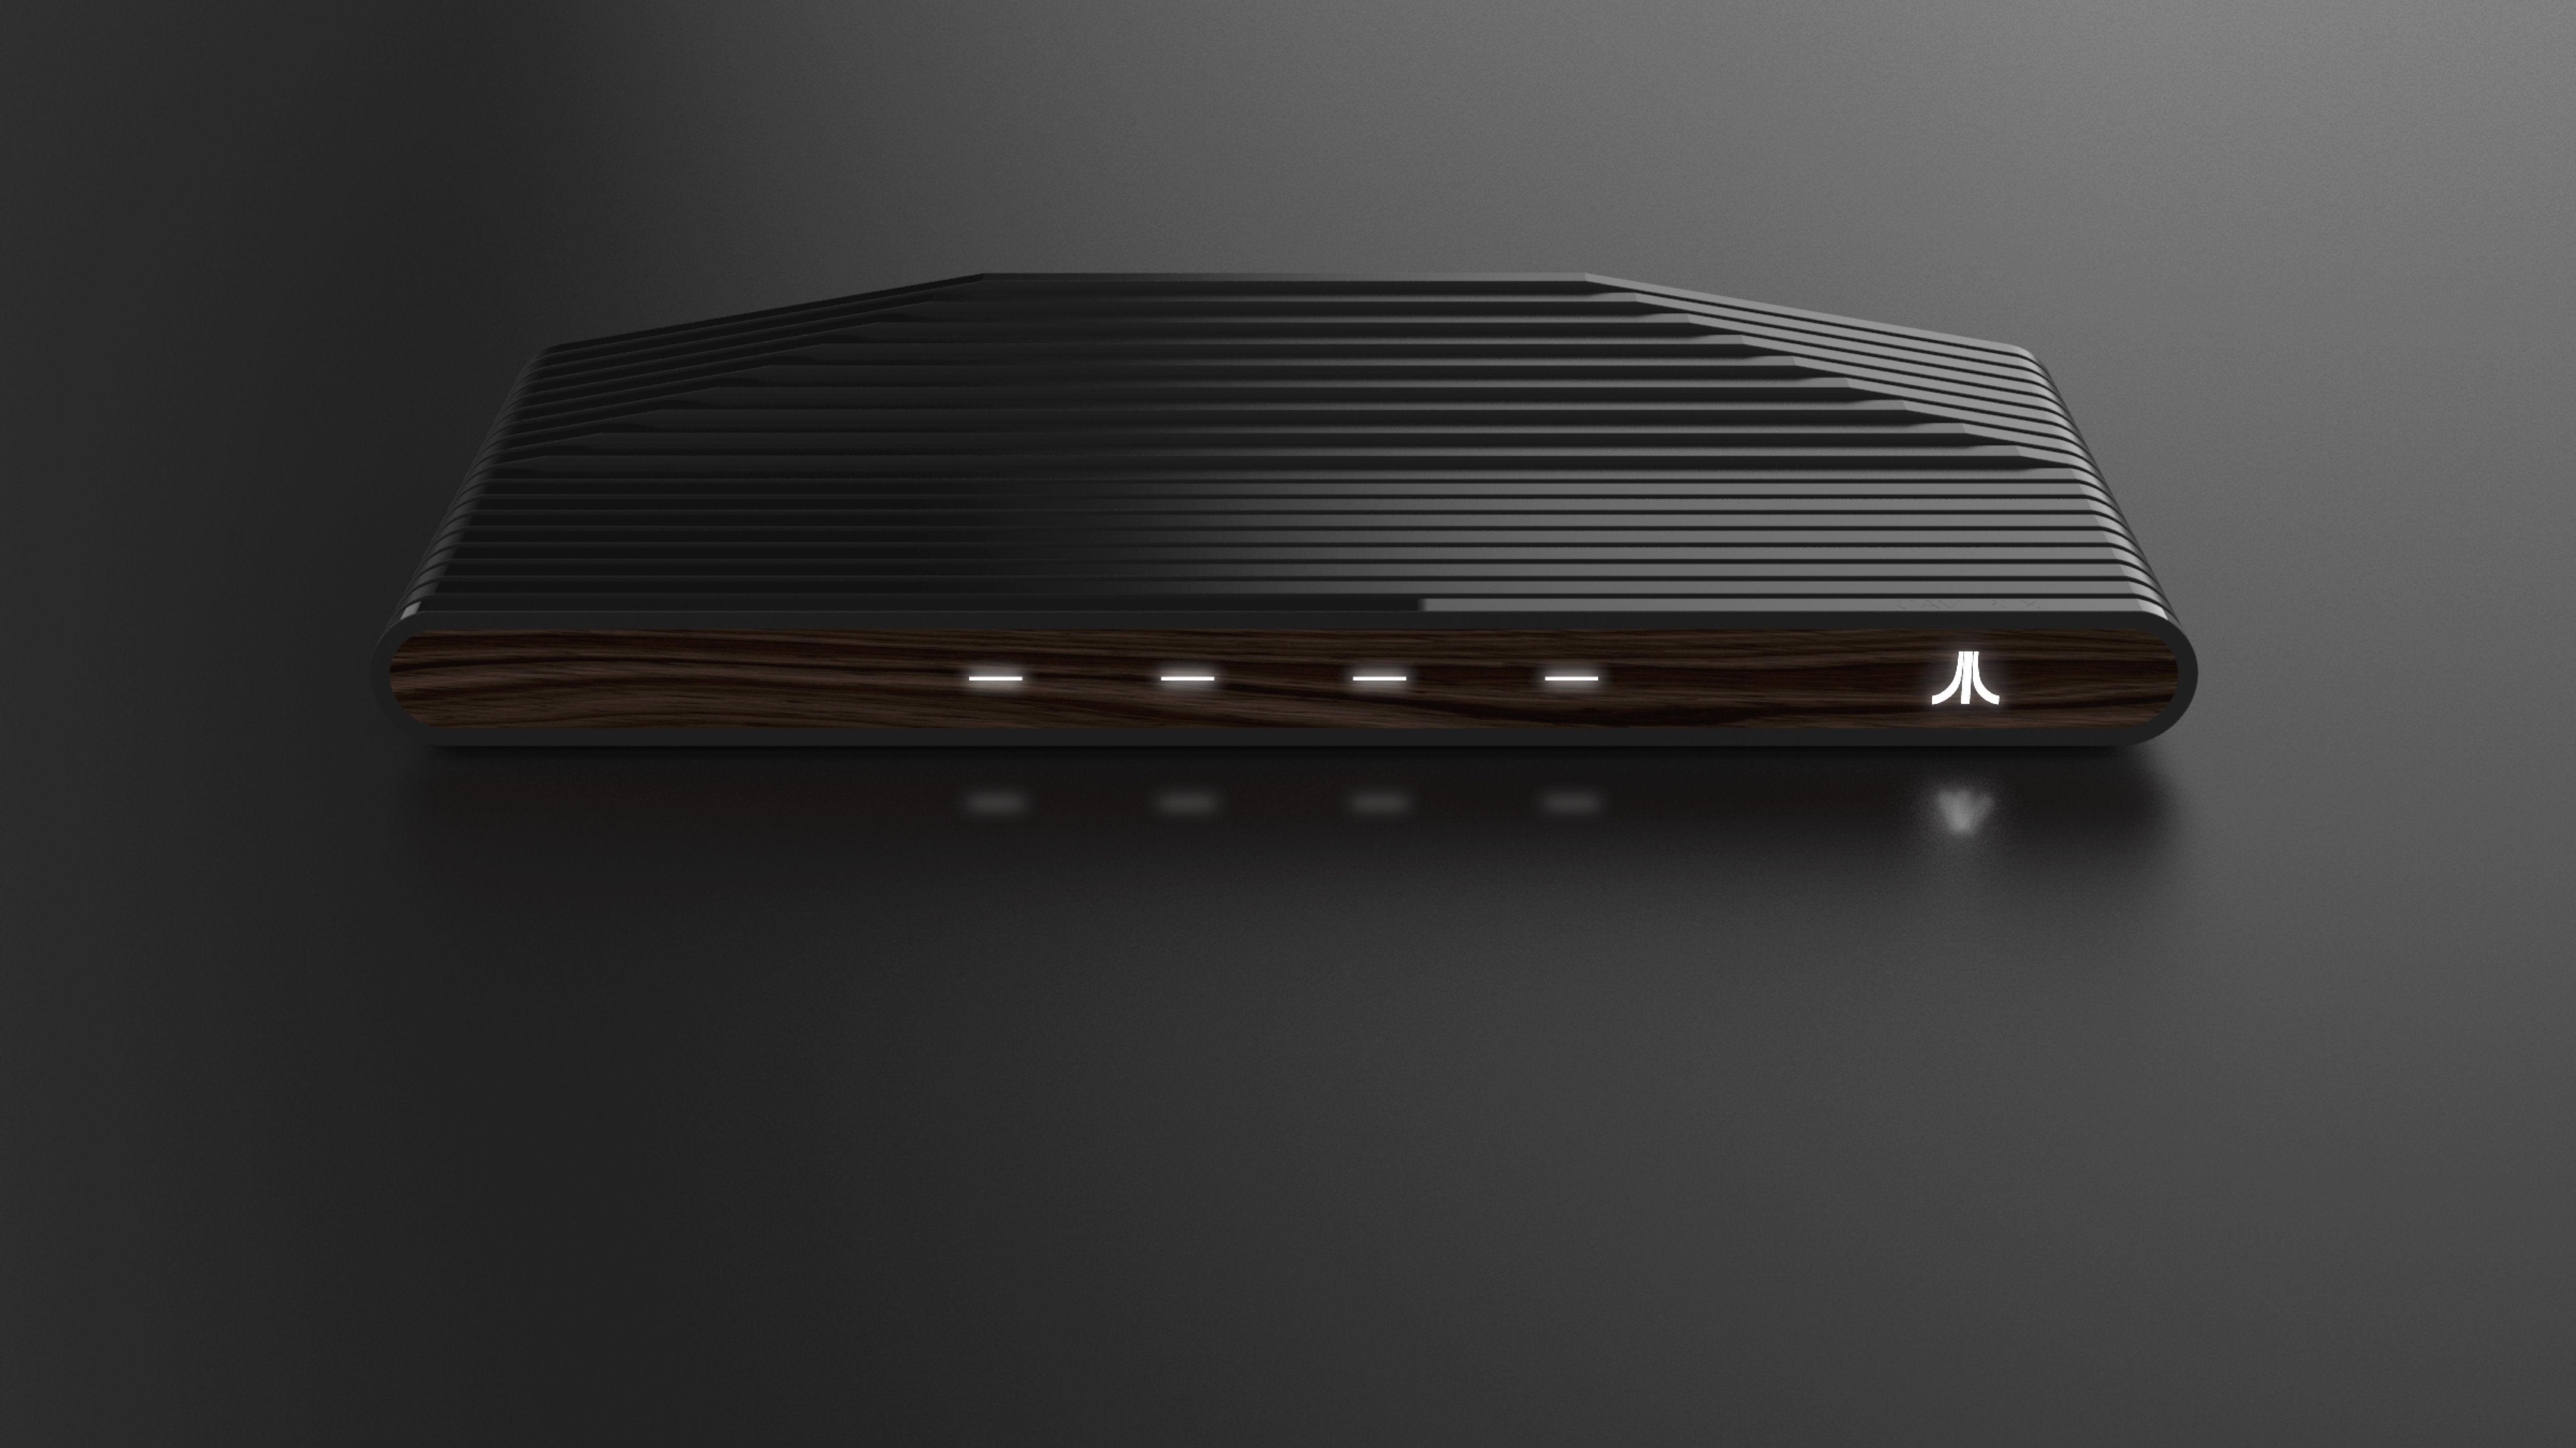 New Details Emerge on the Ataribox